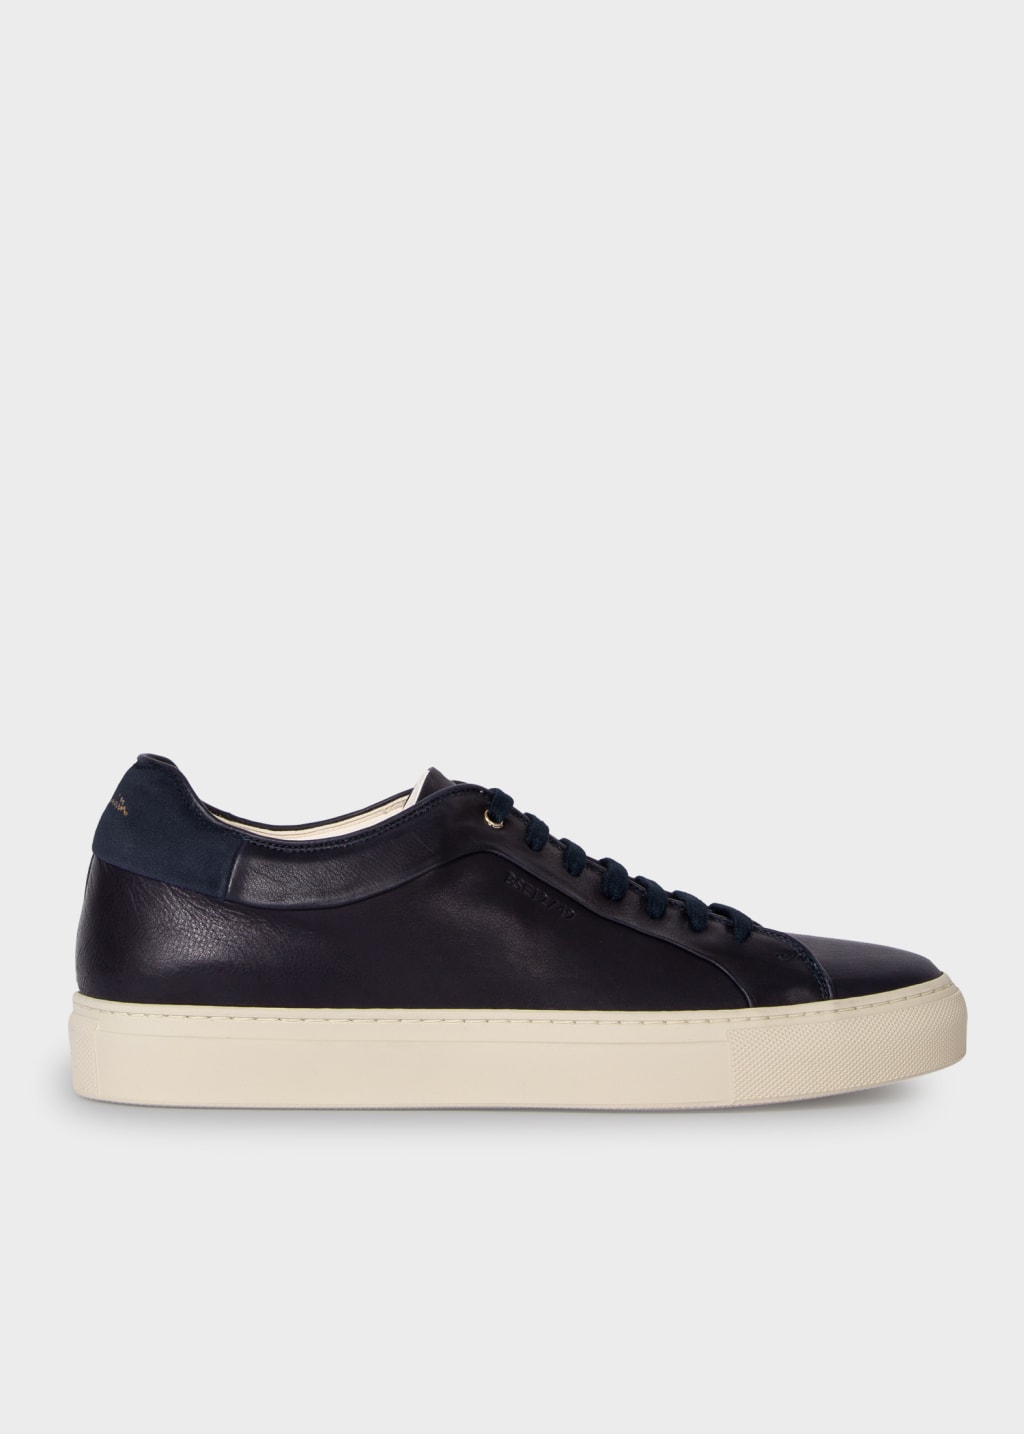 Detail View - Navy Eco 'Basso' Trainers Paul Smith